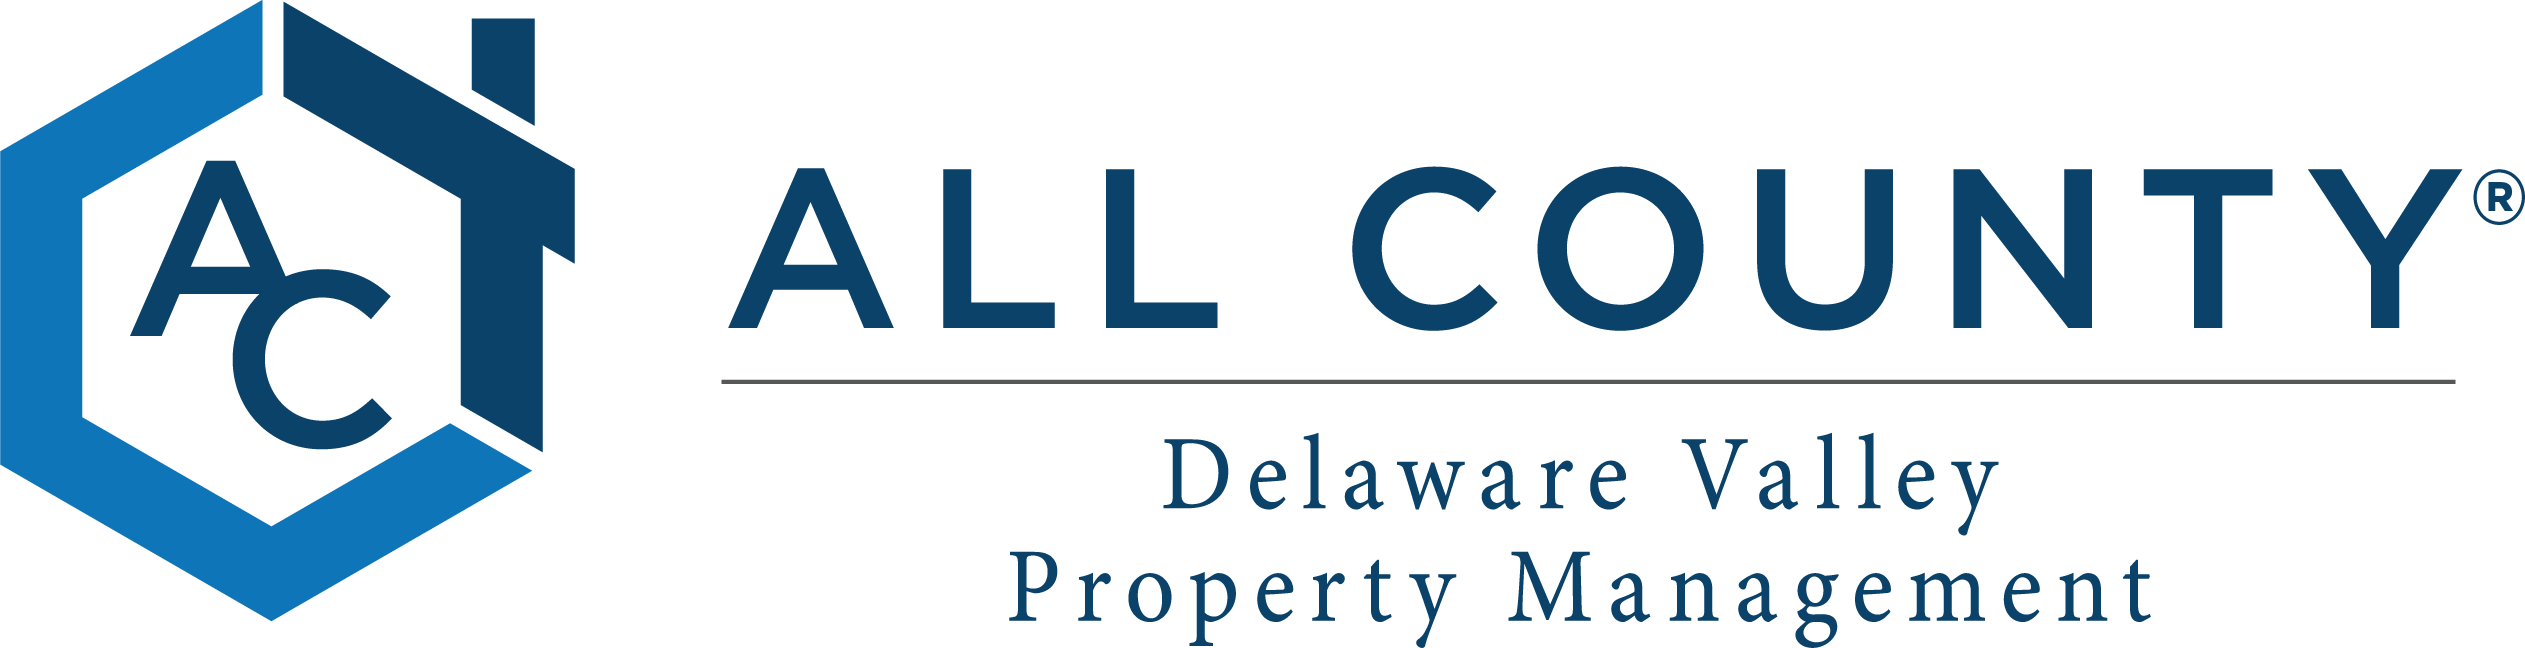 All County Delaware Valley Property Management